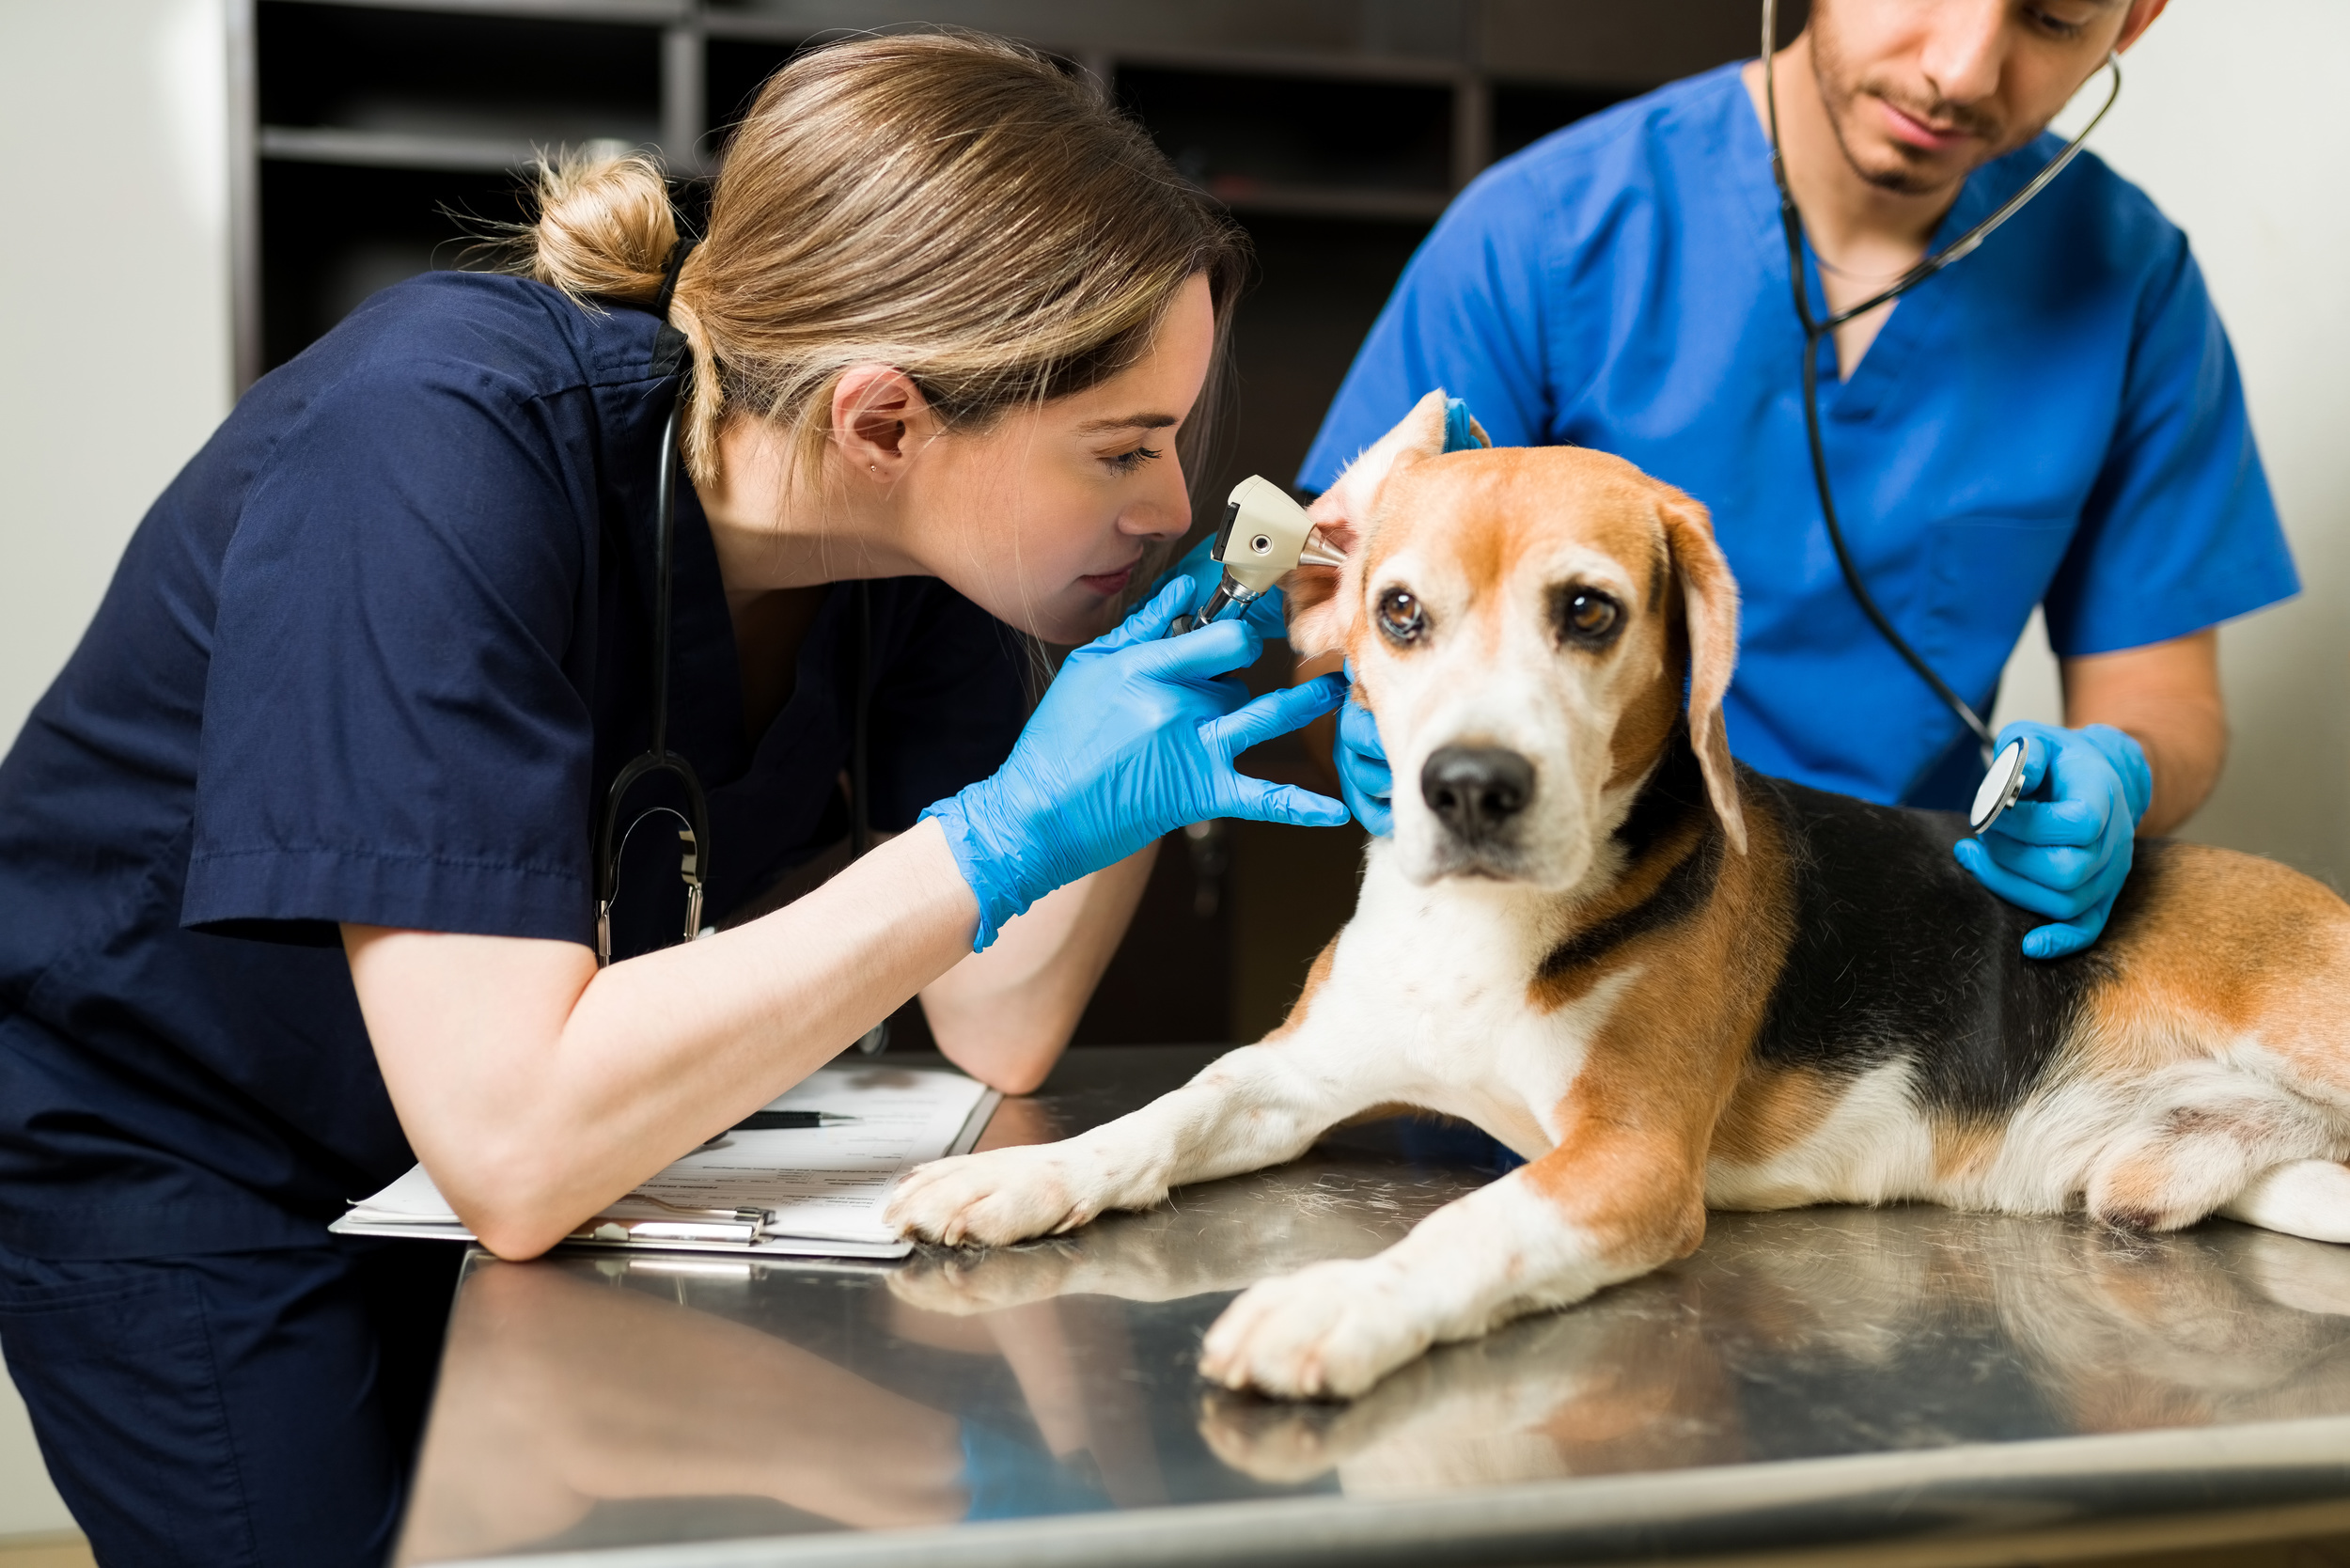 <p>Emergency vet bills and other expensive events involving your pet can happen without a moment's notice, and it's good to have some funds on hand to make sure you've got enough cash to cover your pet's medical care. Set up a small savings fund, and use it to pay for medical expenses as they come up. </p>